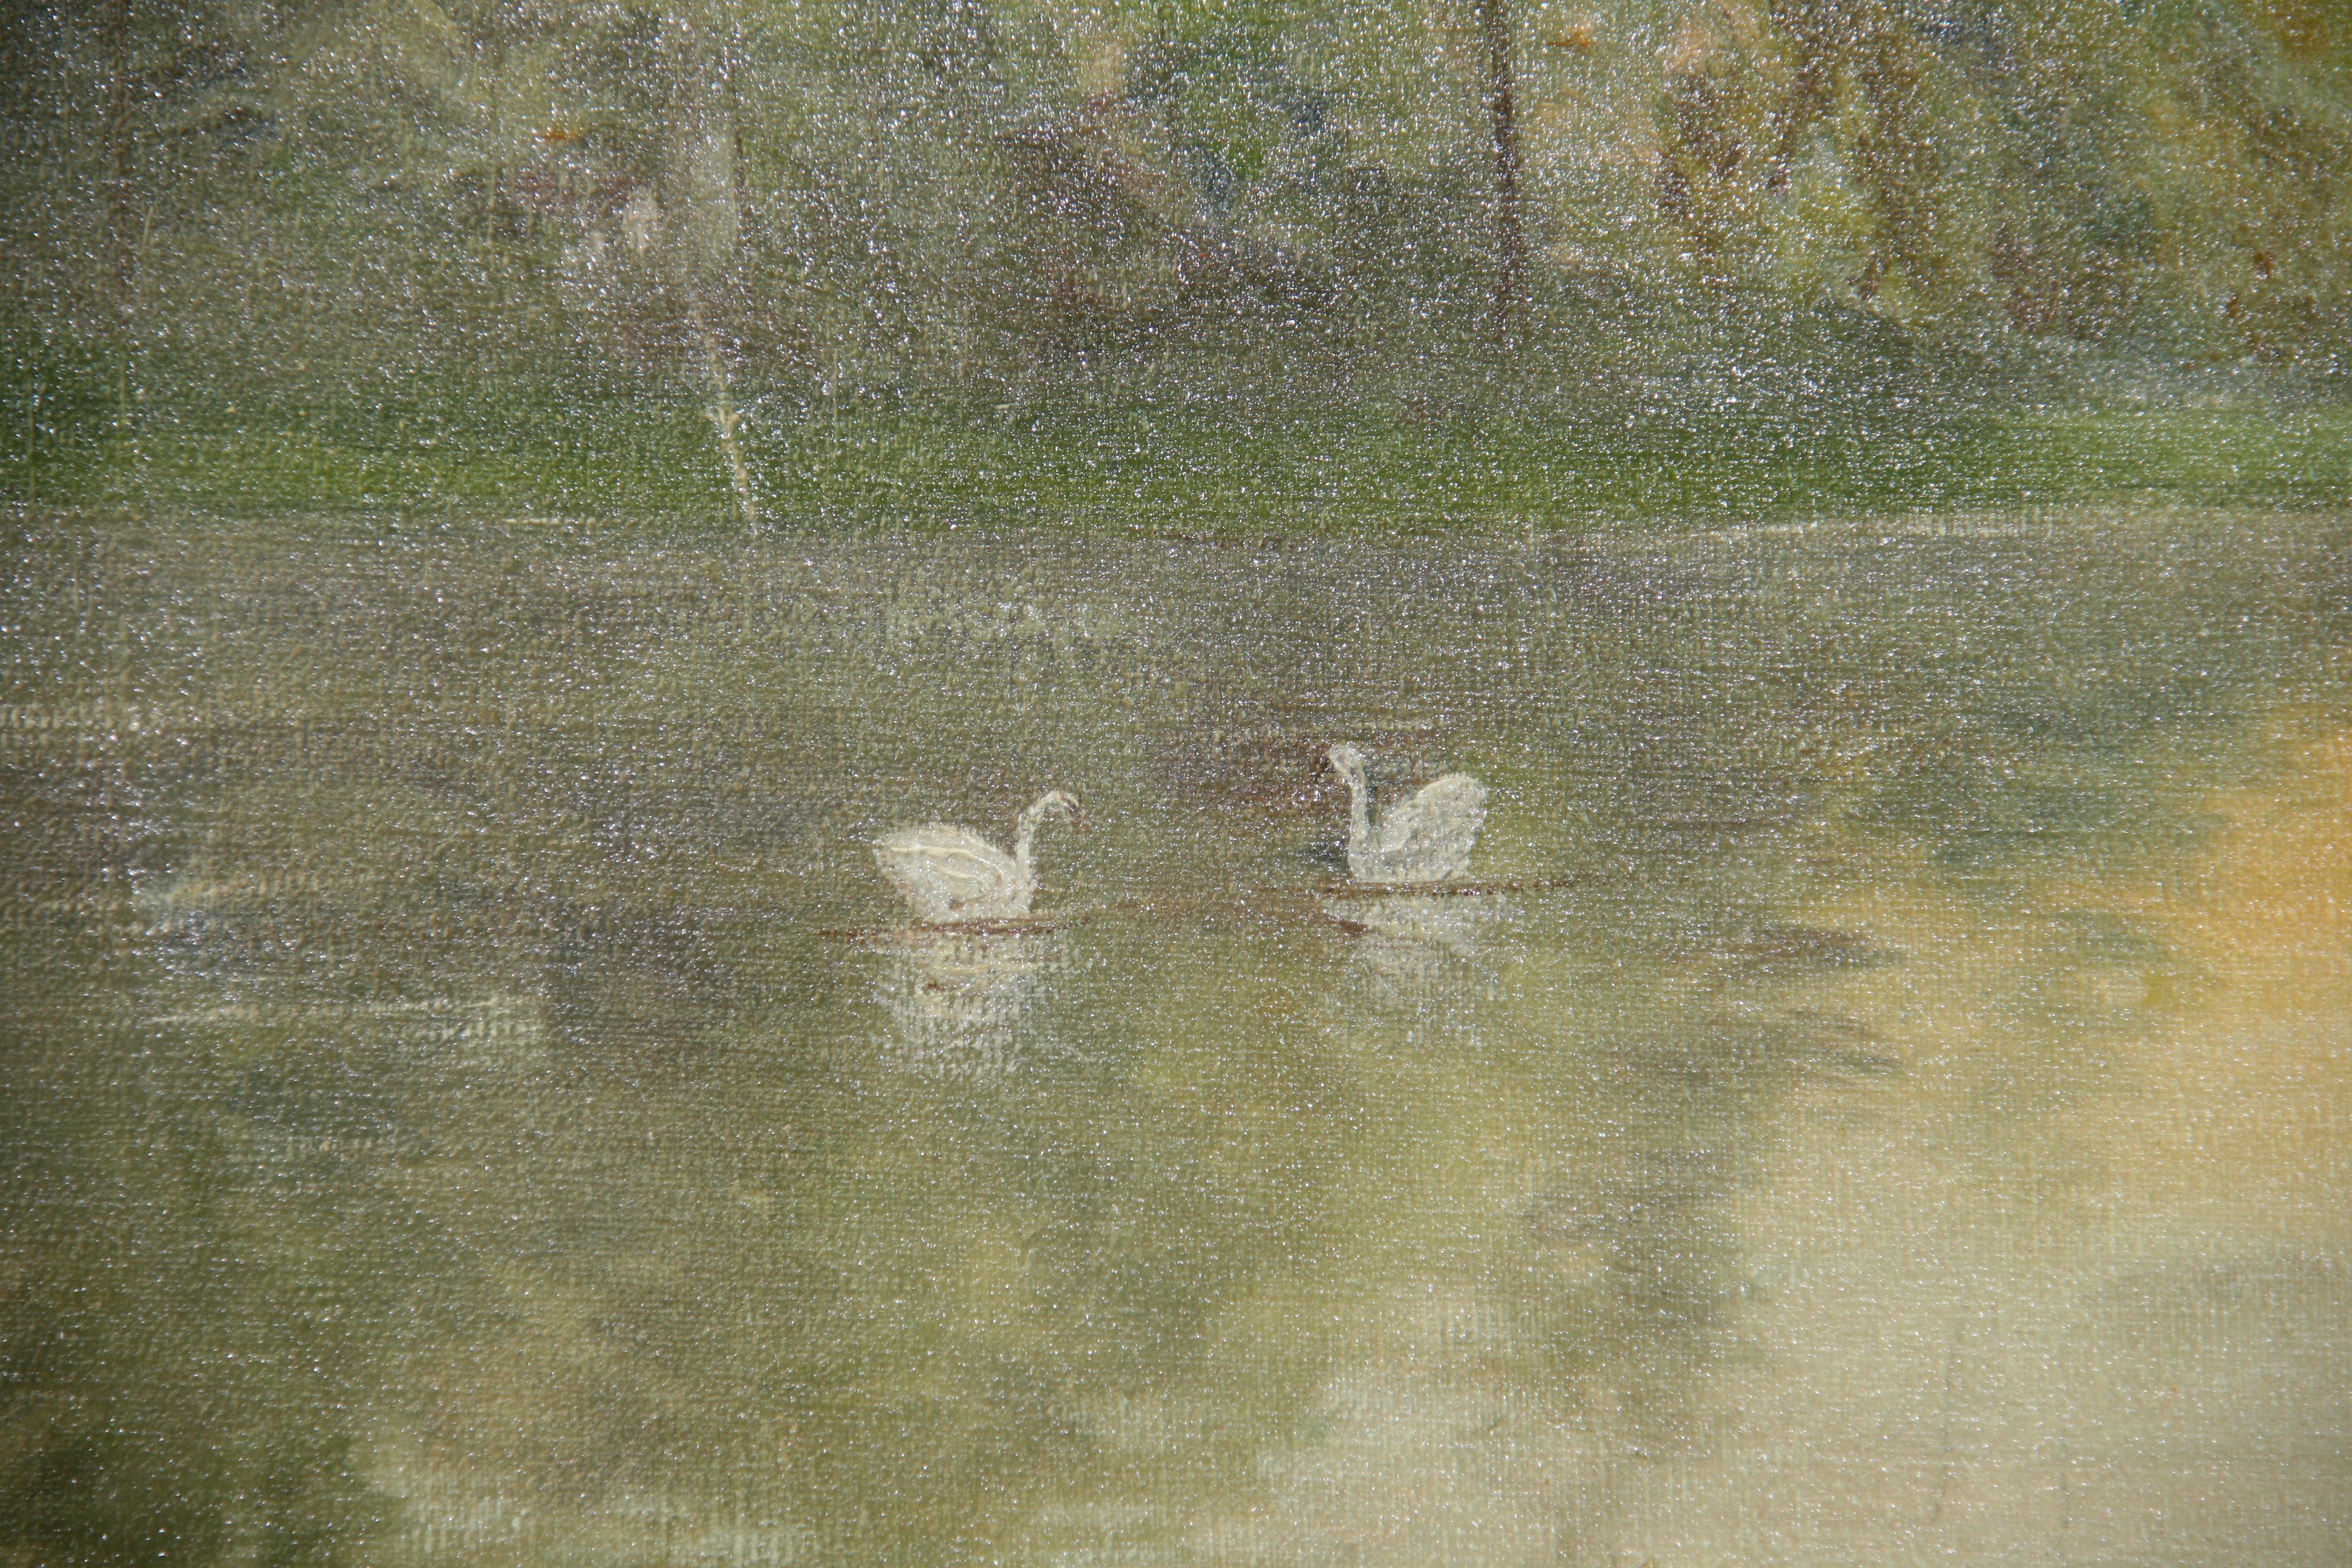 Antique Landscape oil Painting Misty Morning Swans on the lake By L.Hilden 1920' For Sale 1